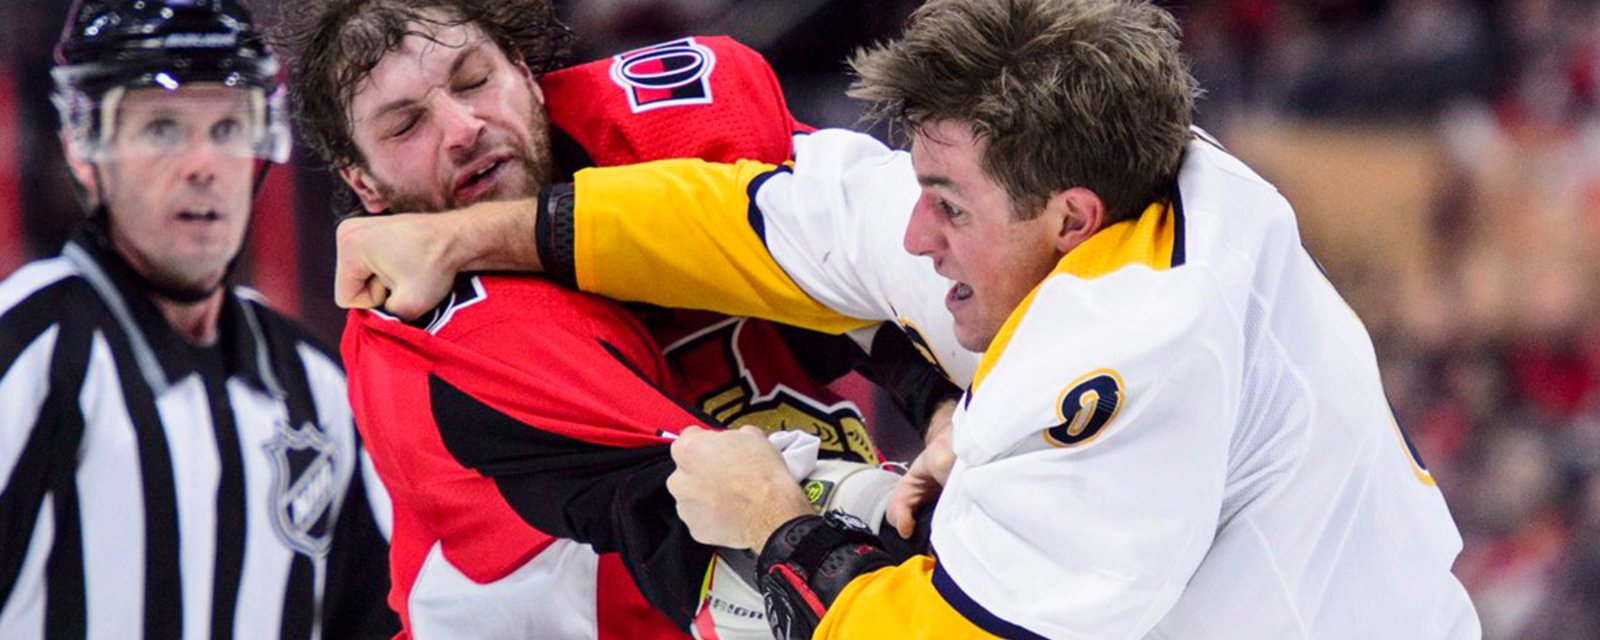 Former teammates and good friends Bobby Ryan and Kyle Turris drop the gloves 